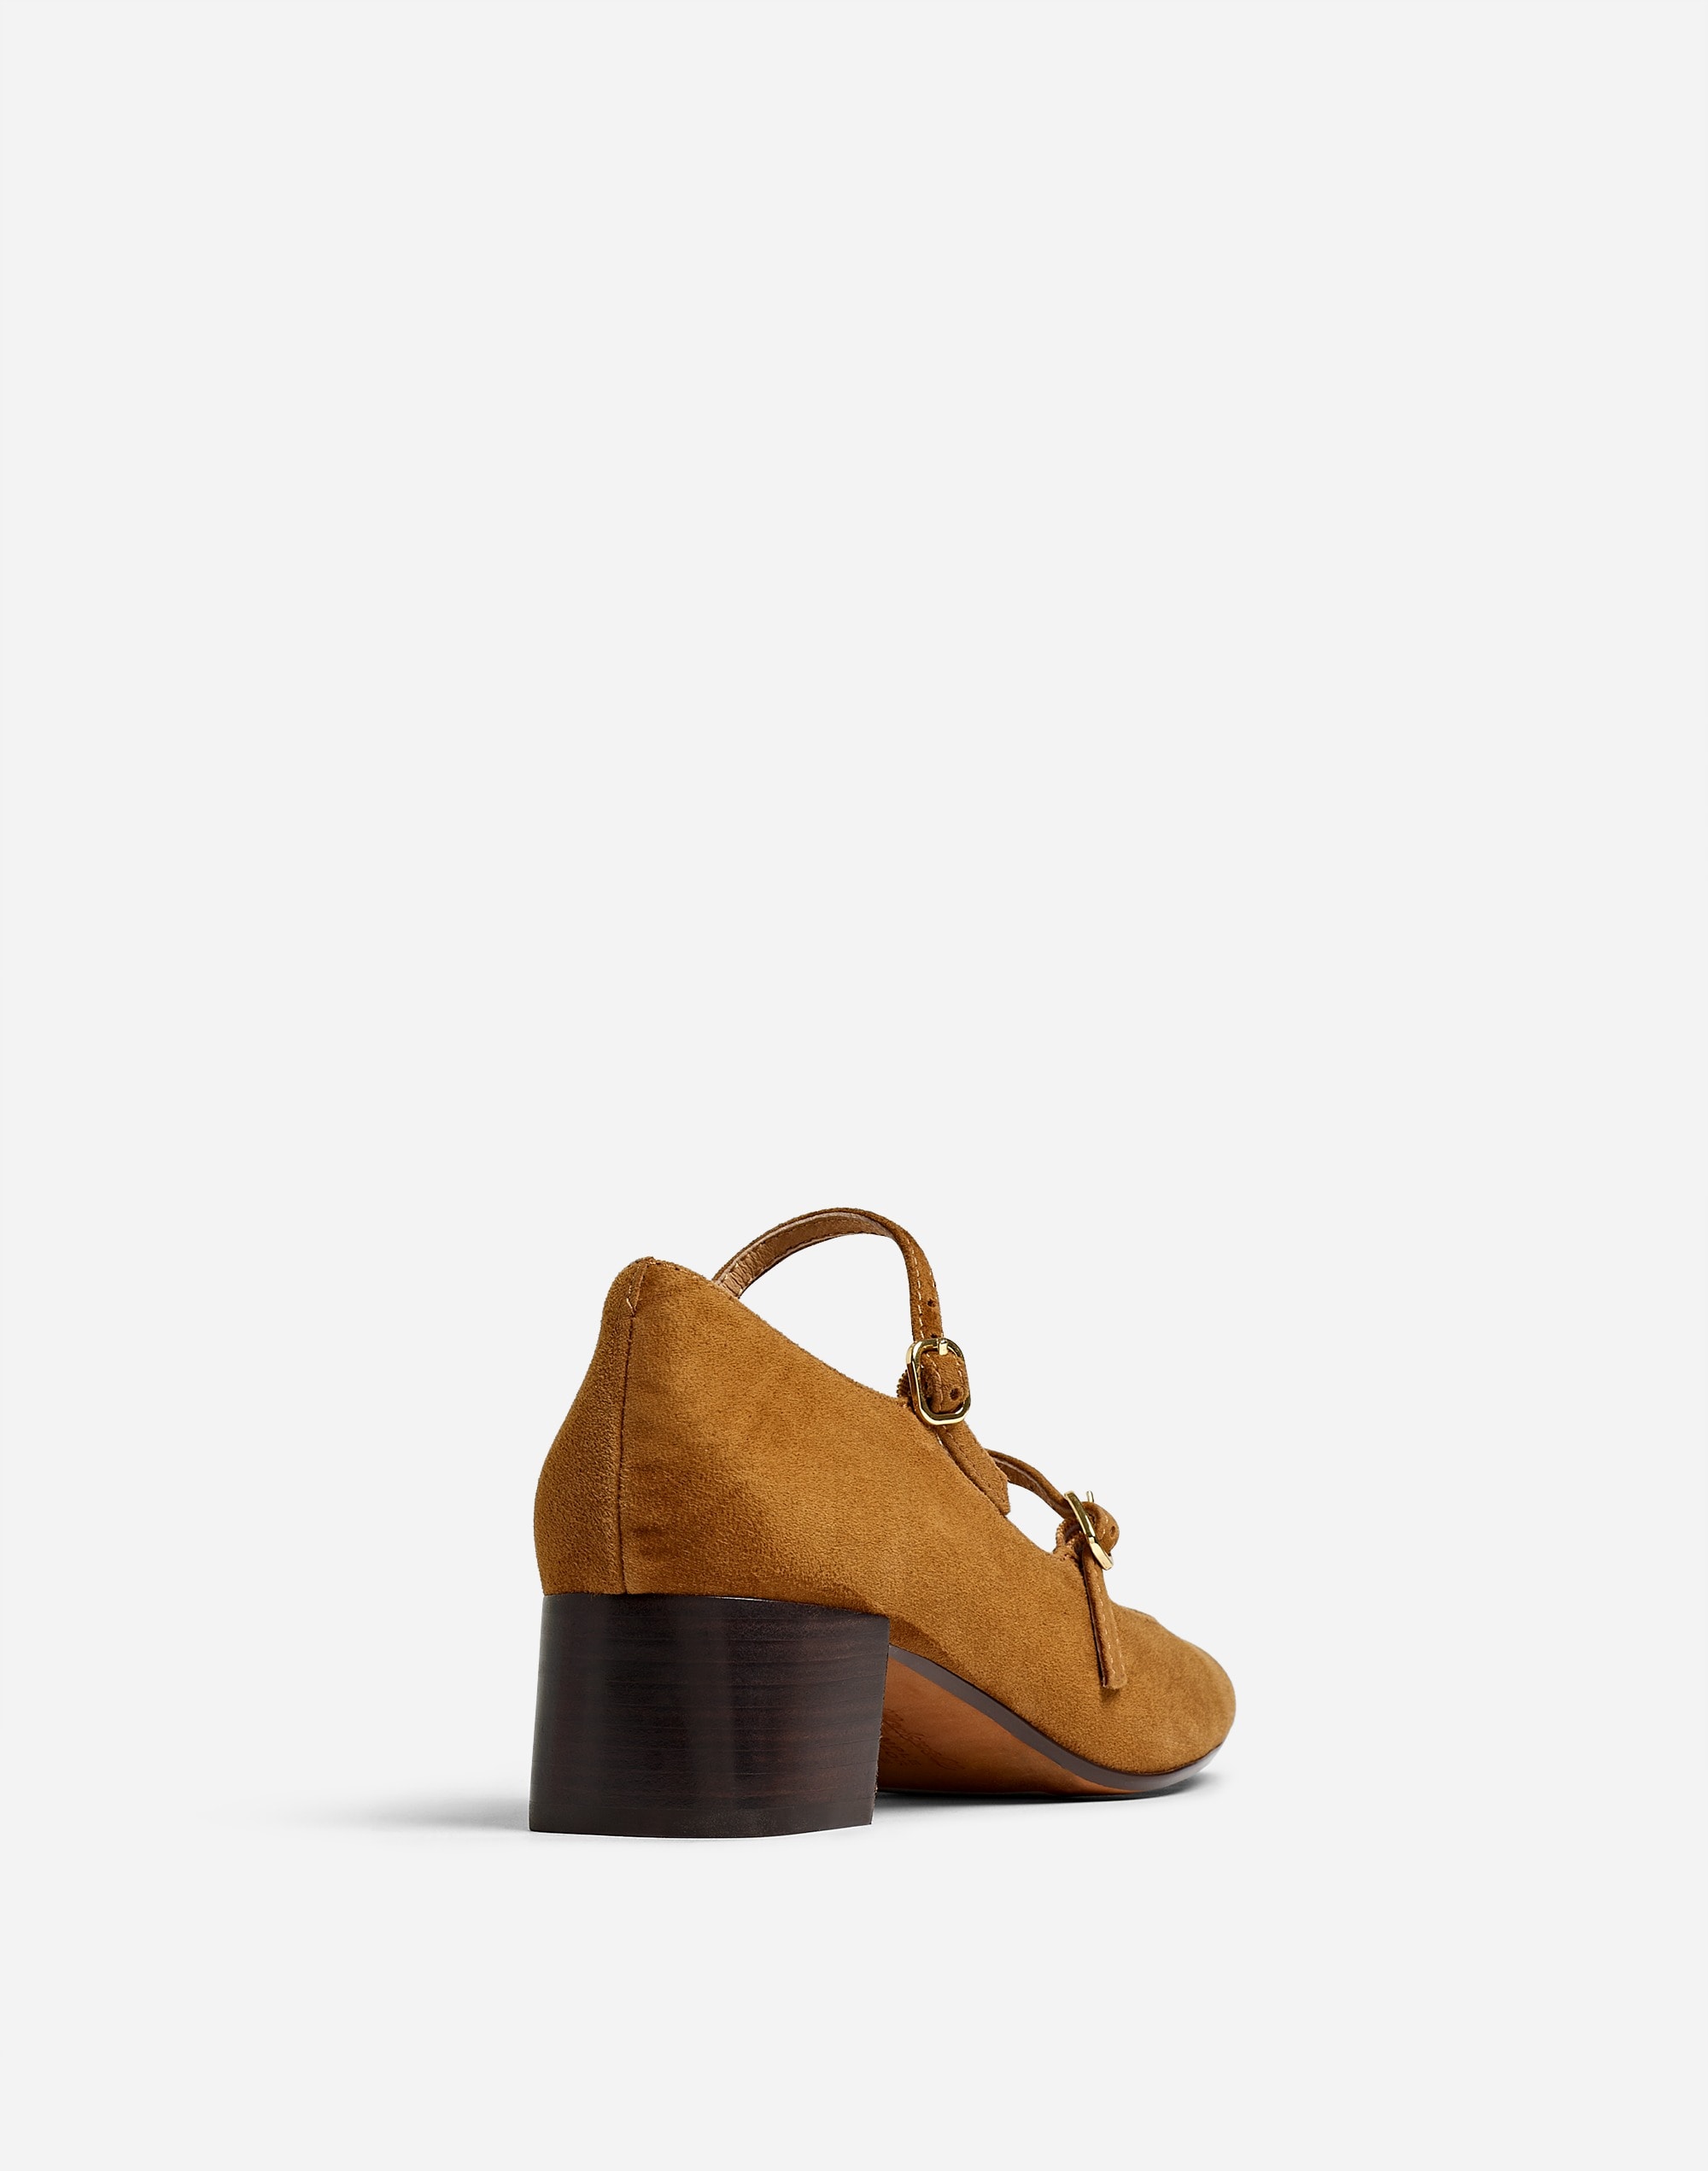 The Nettie Heeled Mary Jane Suede